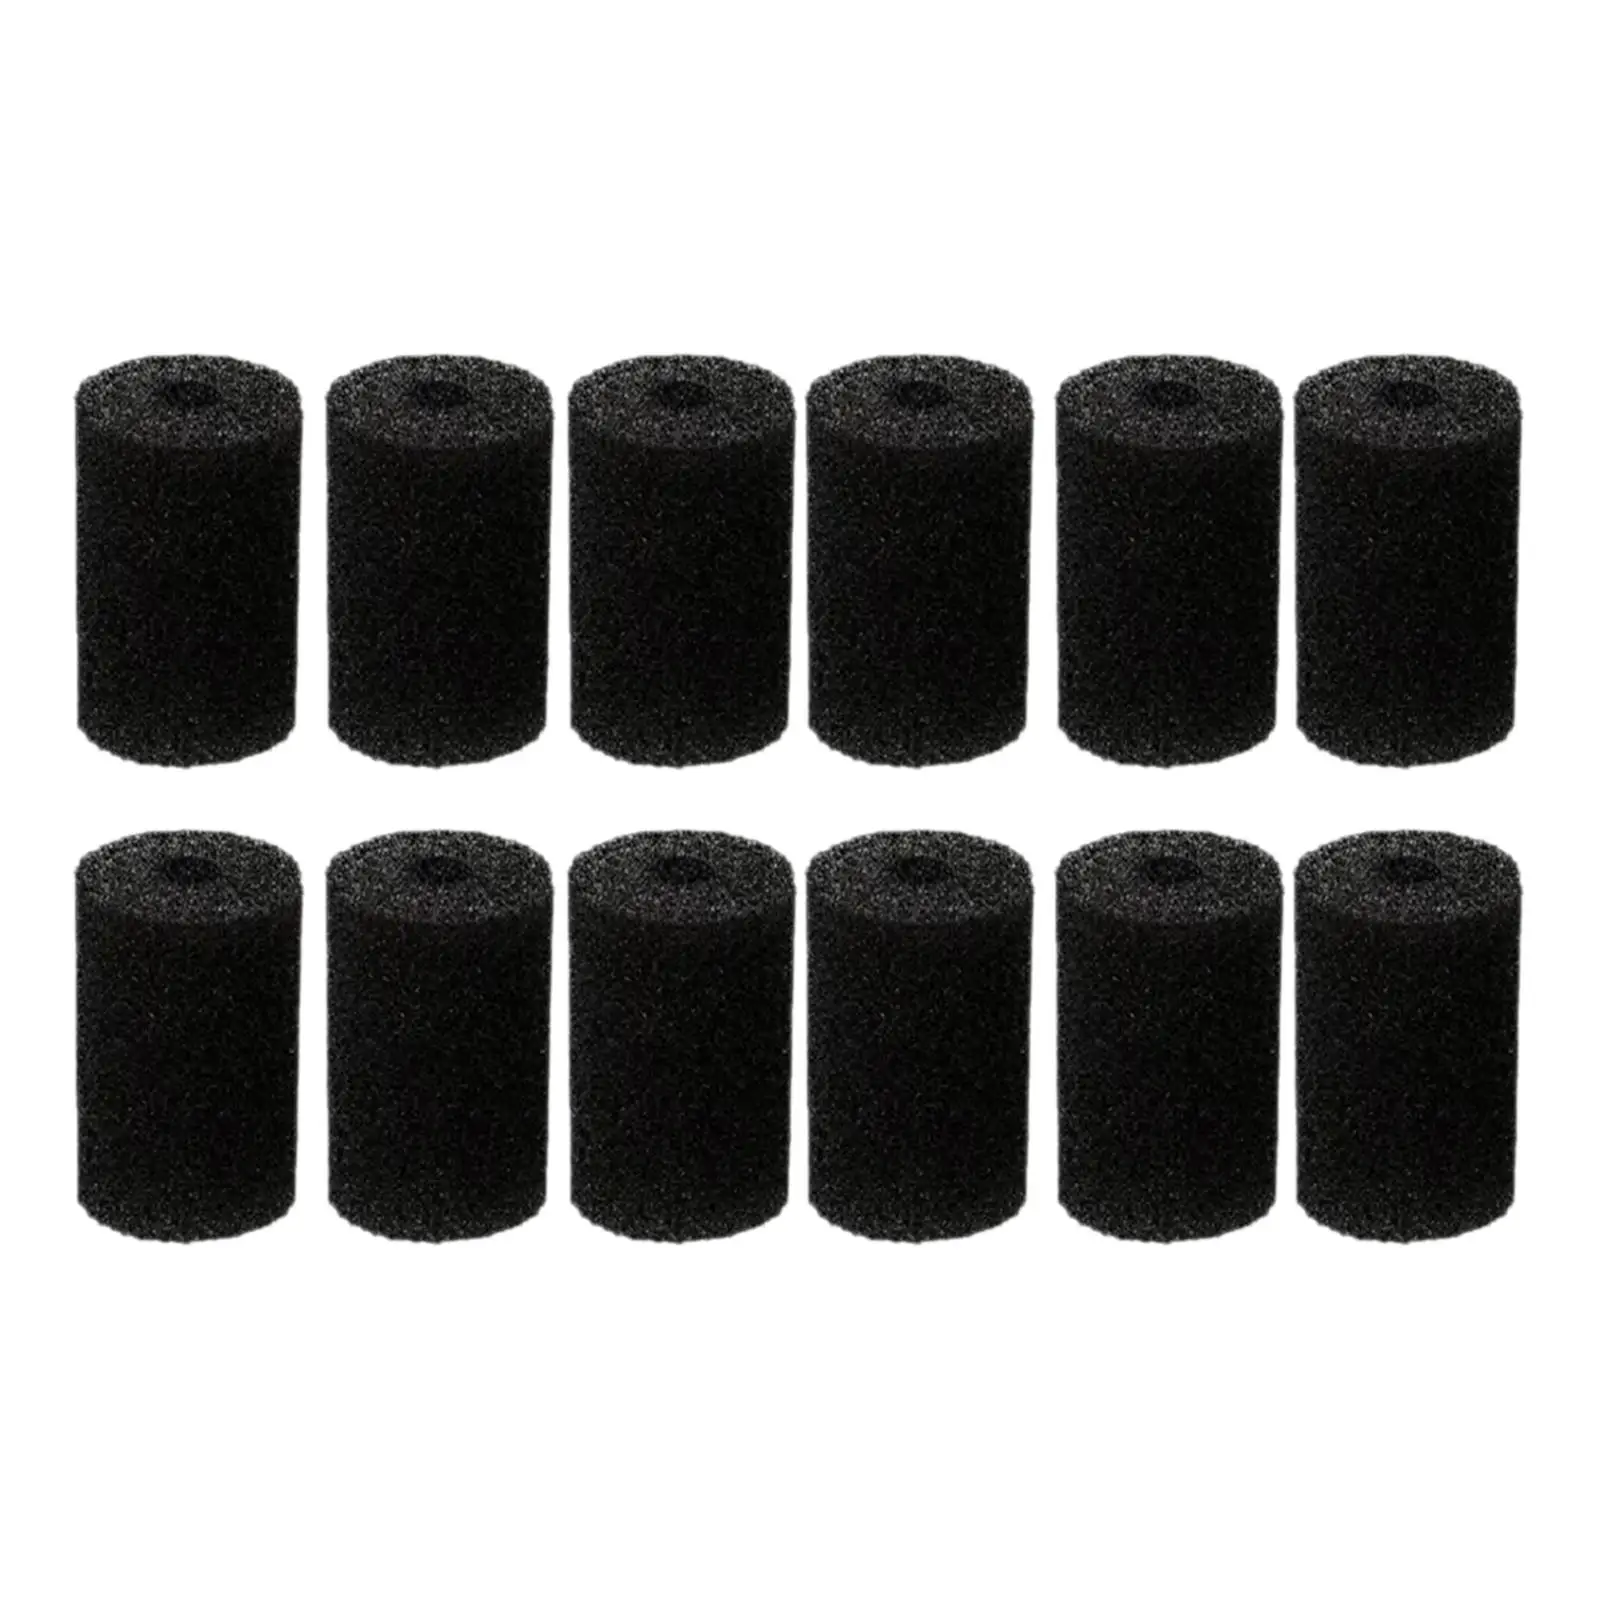 12x Swimming Pool Cleaner Sweep Hose Scrubber Flexible Cleaning Tools Durable Easy to Install High Density Supply Black